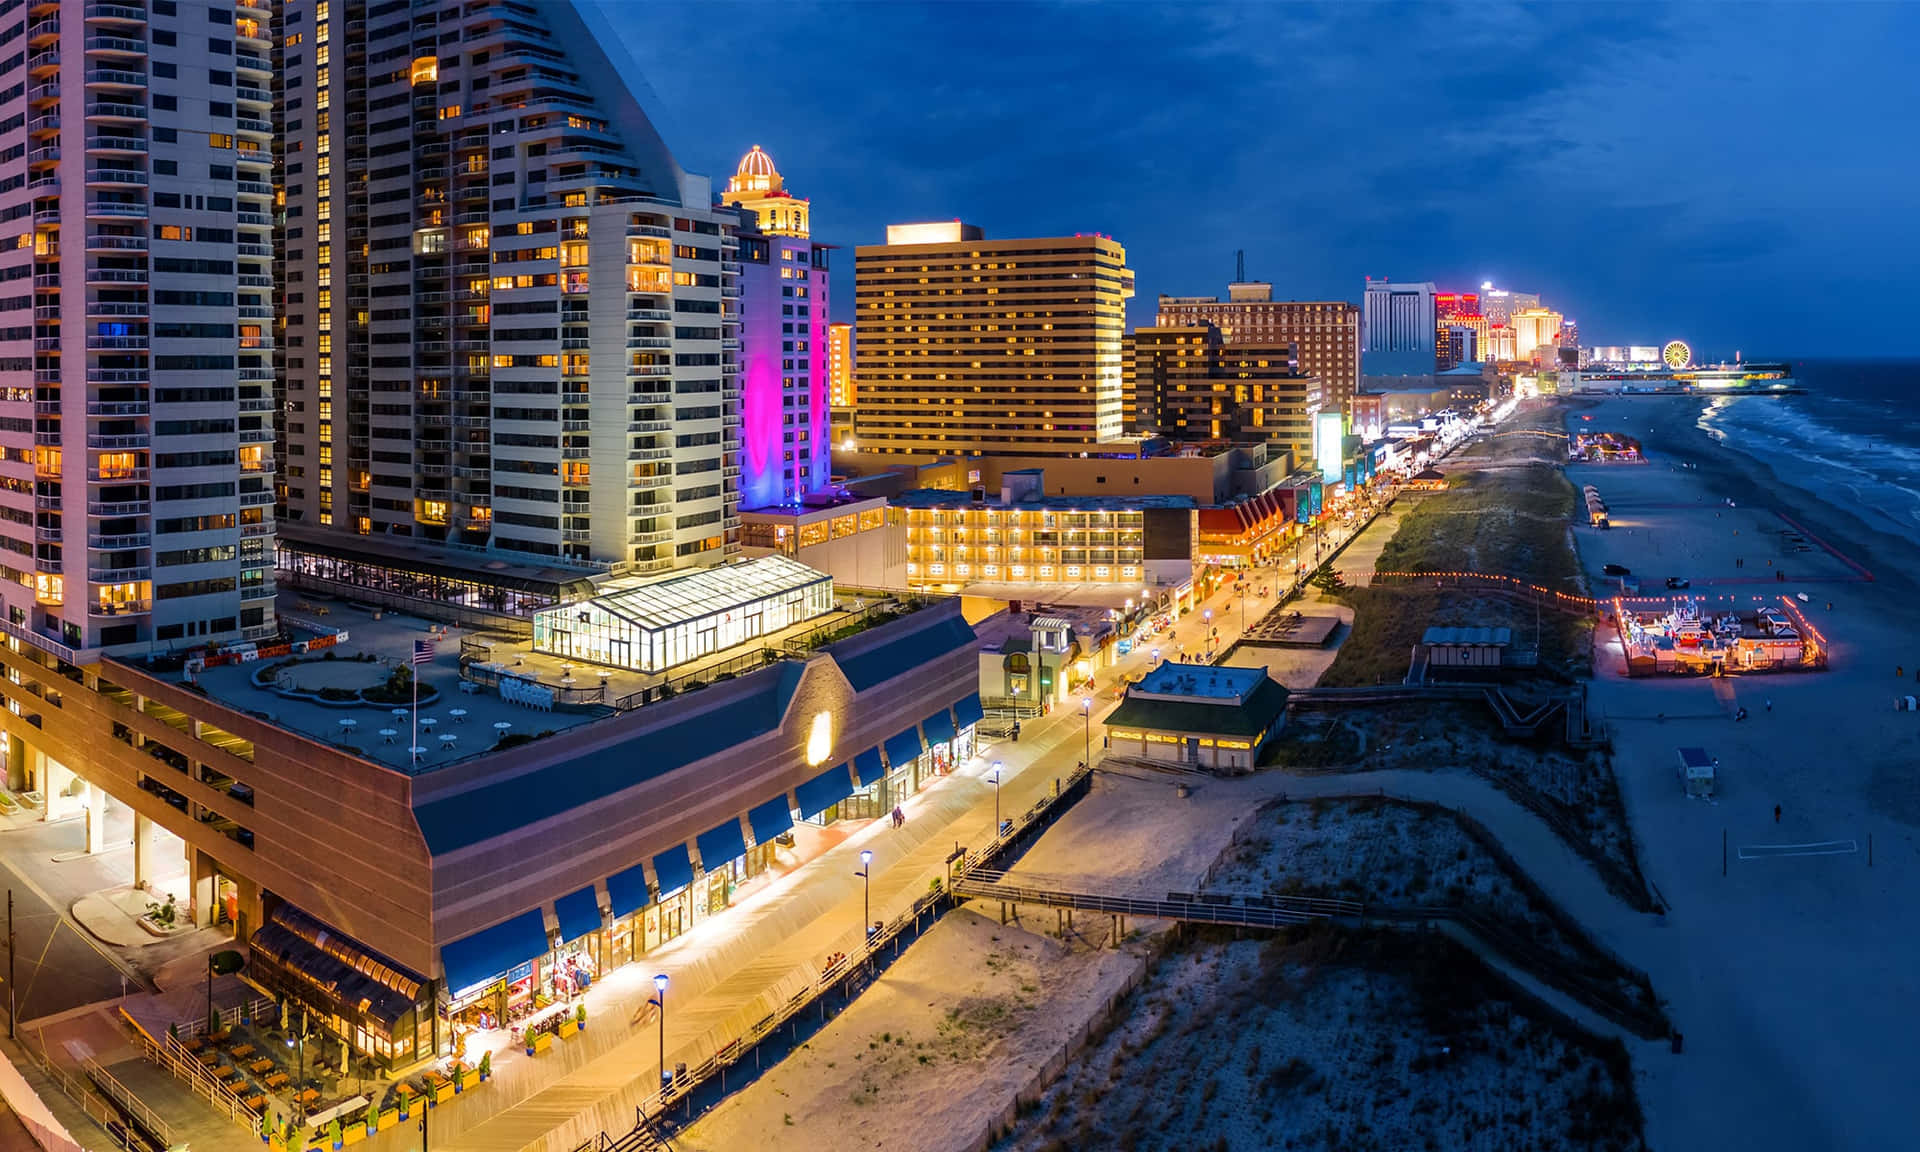 Atlantic City Buildings And Beach At Night Picture